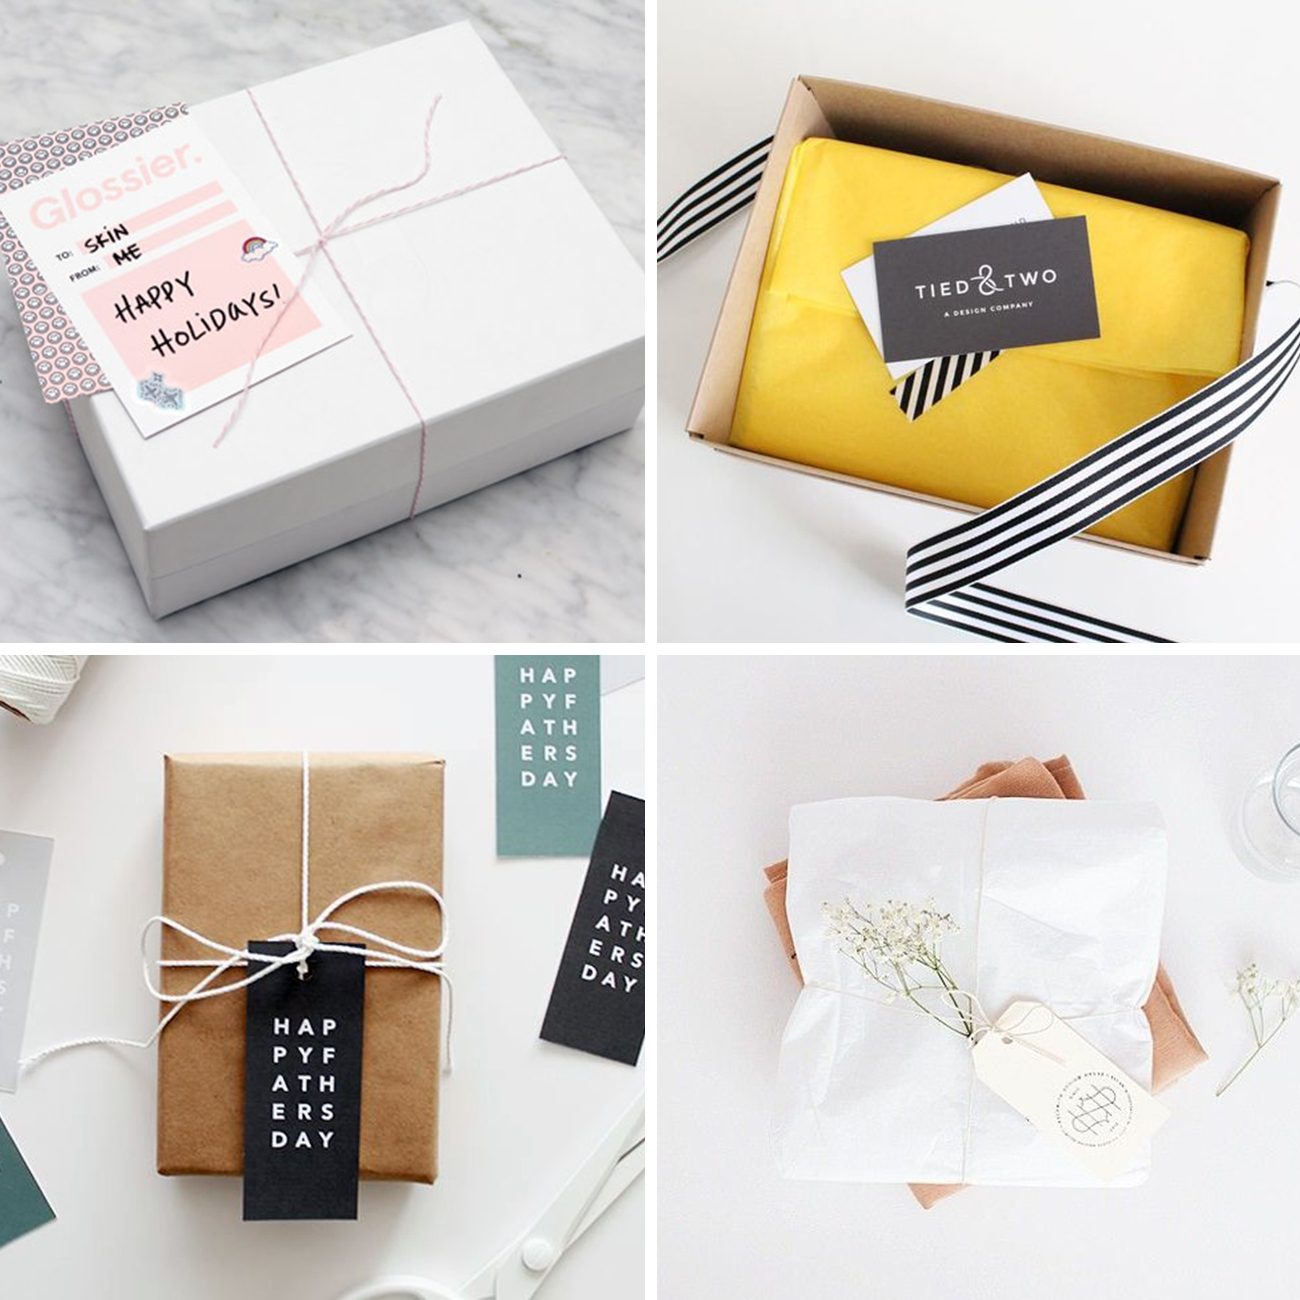 Photos via: —, Glossier, Tied &amp; Two, Almost Makes Perfect, Oh So Pretty 90 Ideas to Spruce Up Your Holiday Packaging Design